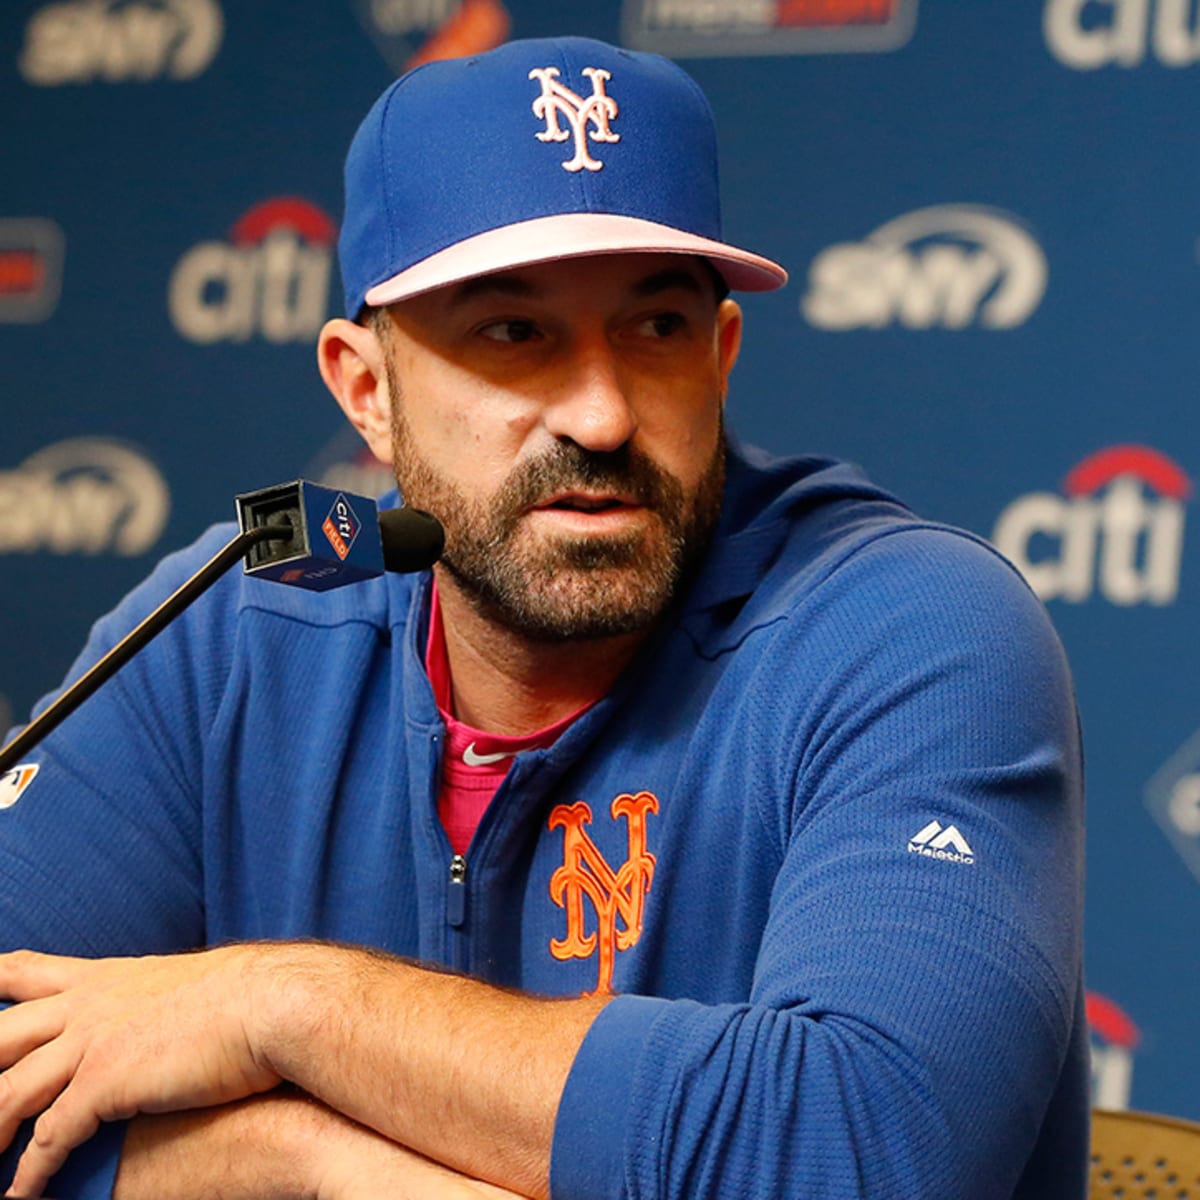 Mickey Callaway is not the only NL East manager who'll be under